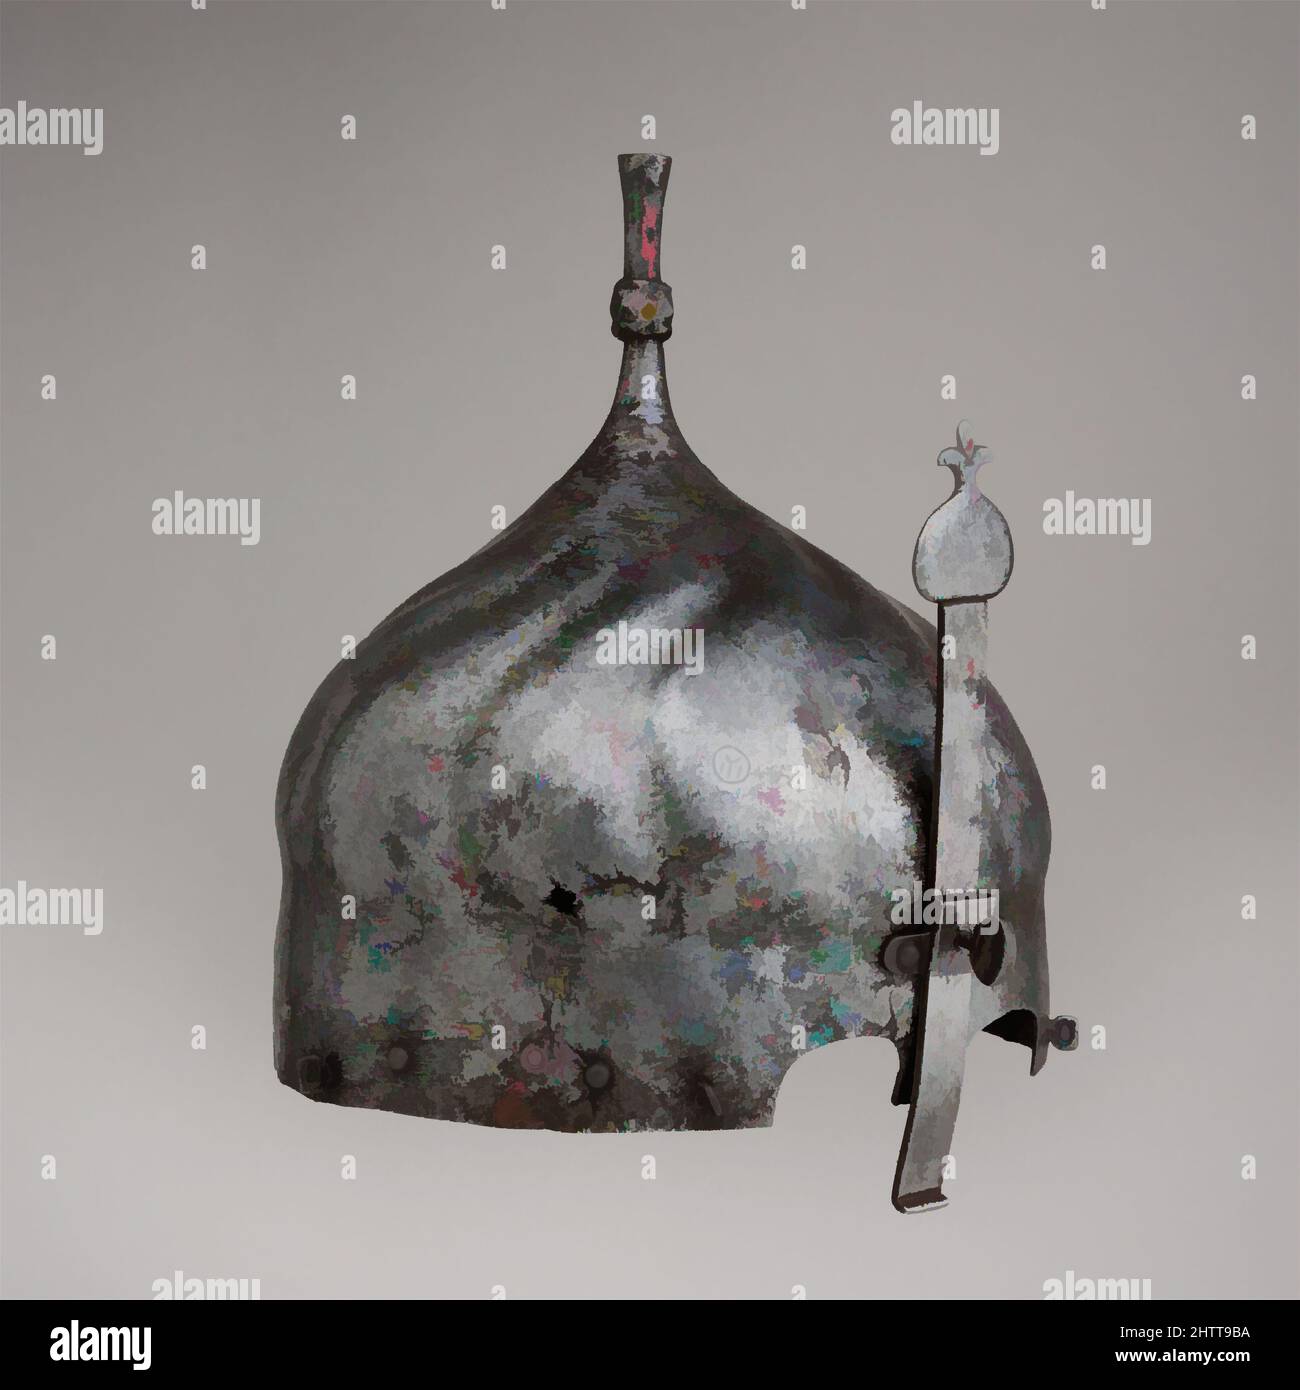 Art inspired by Helmet, 16th century, Istanbul, Turkish, Iron, H. including nasal 13 5/8 in. (34.6 cm); H. excluding nasal 9 5/8 in. (24.4 cm); W. 8 1/2 in. (21.6 cm); D. 9 1/4 in. (23.5 cm); Wt. 2 lb. 13.6 oz. (1292.7 g), Helmets, Classic works modernized by Artotop with a splash of modernity. Shapes, color and value, eye-catching visual impact on art. Emotions through freedom of artworks in a contemporary way. A timeless message pursuing a wildly creative new direction. Artists turning to the digital medium and creating the Artotop NFT Stock Photo